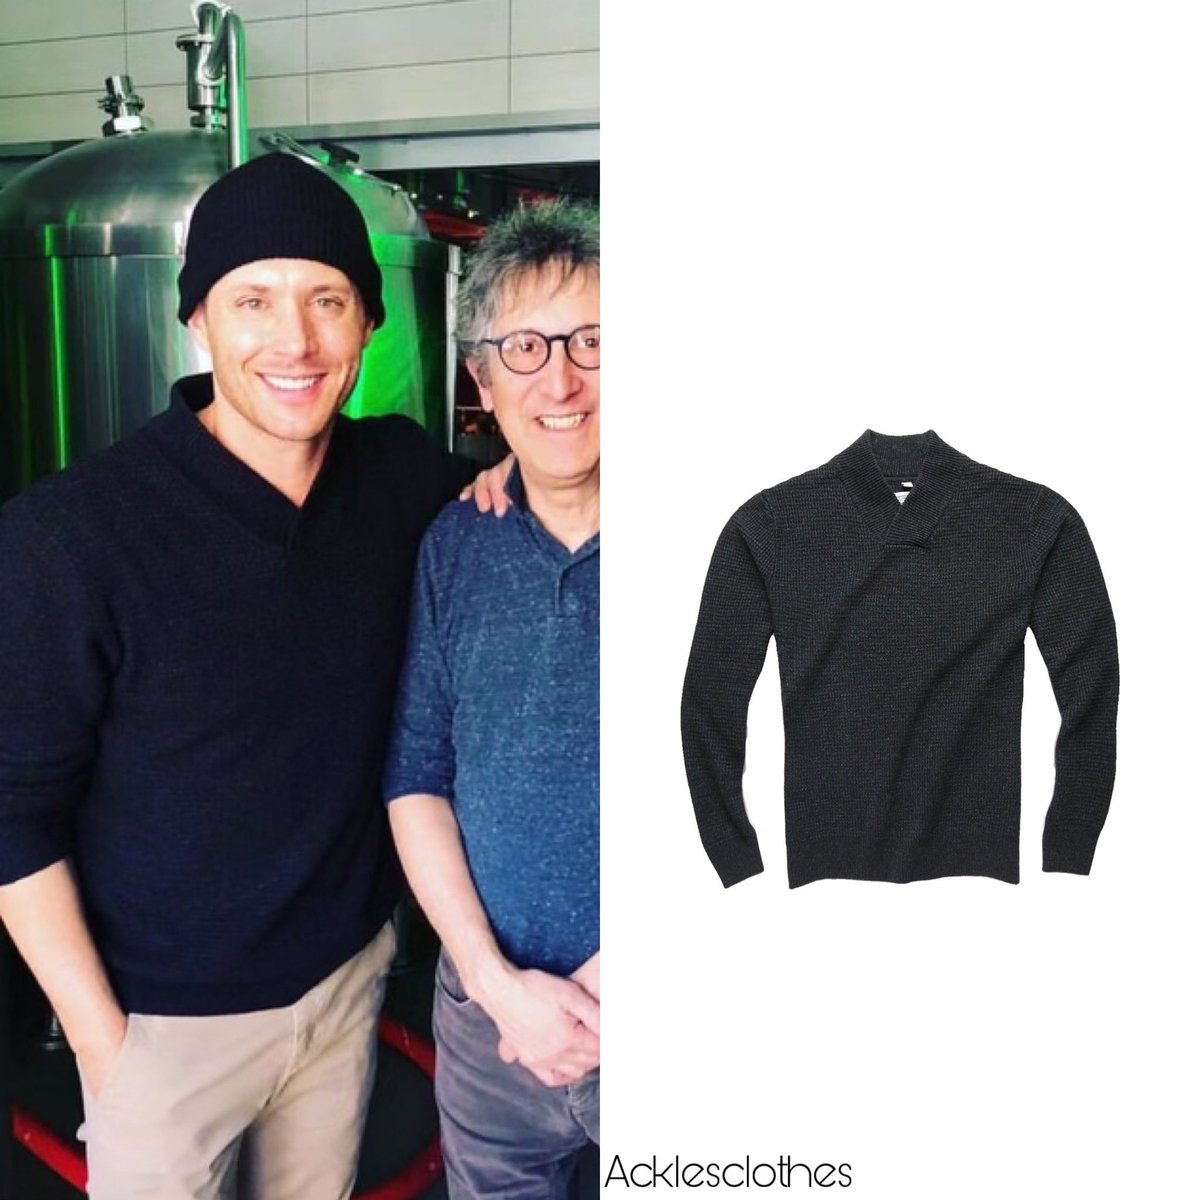 Throwback Thursday! At a brewery in Montreal, Canada in 2018, @jensenackles wore a @schottnyc V-neck Waffle Sweater that sells for $90.